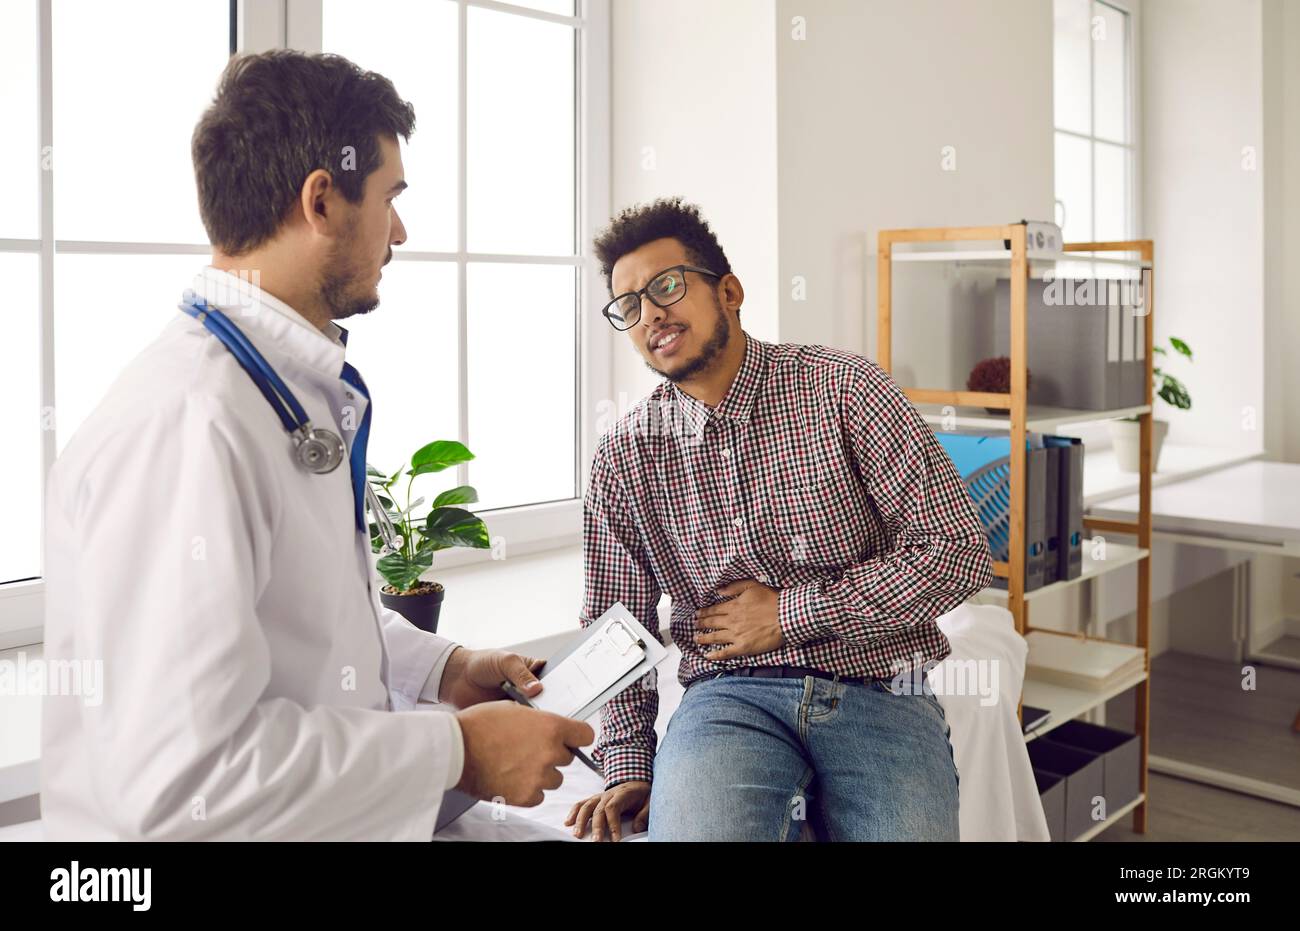 Young man with stomach ache and pain in his right side seeing doctor at hospital Stock Photo